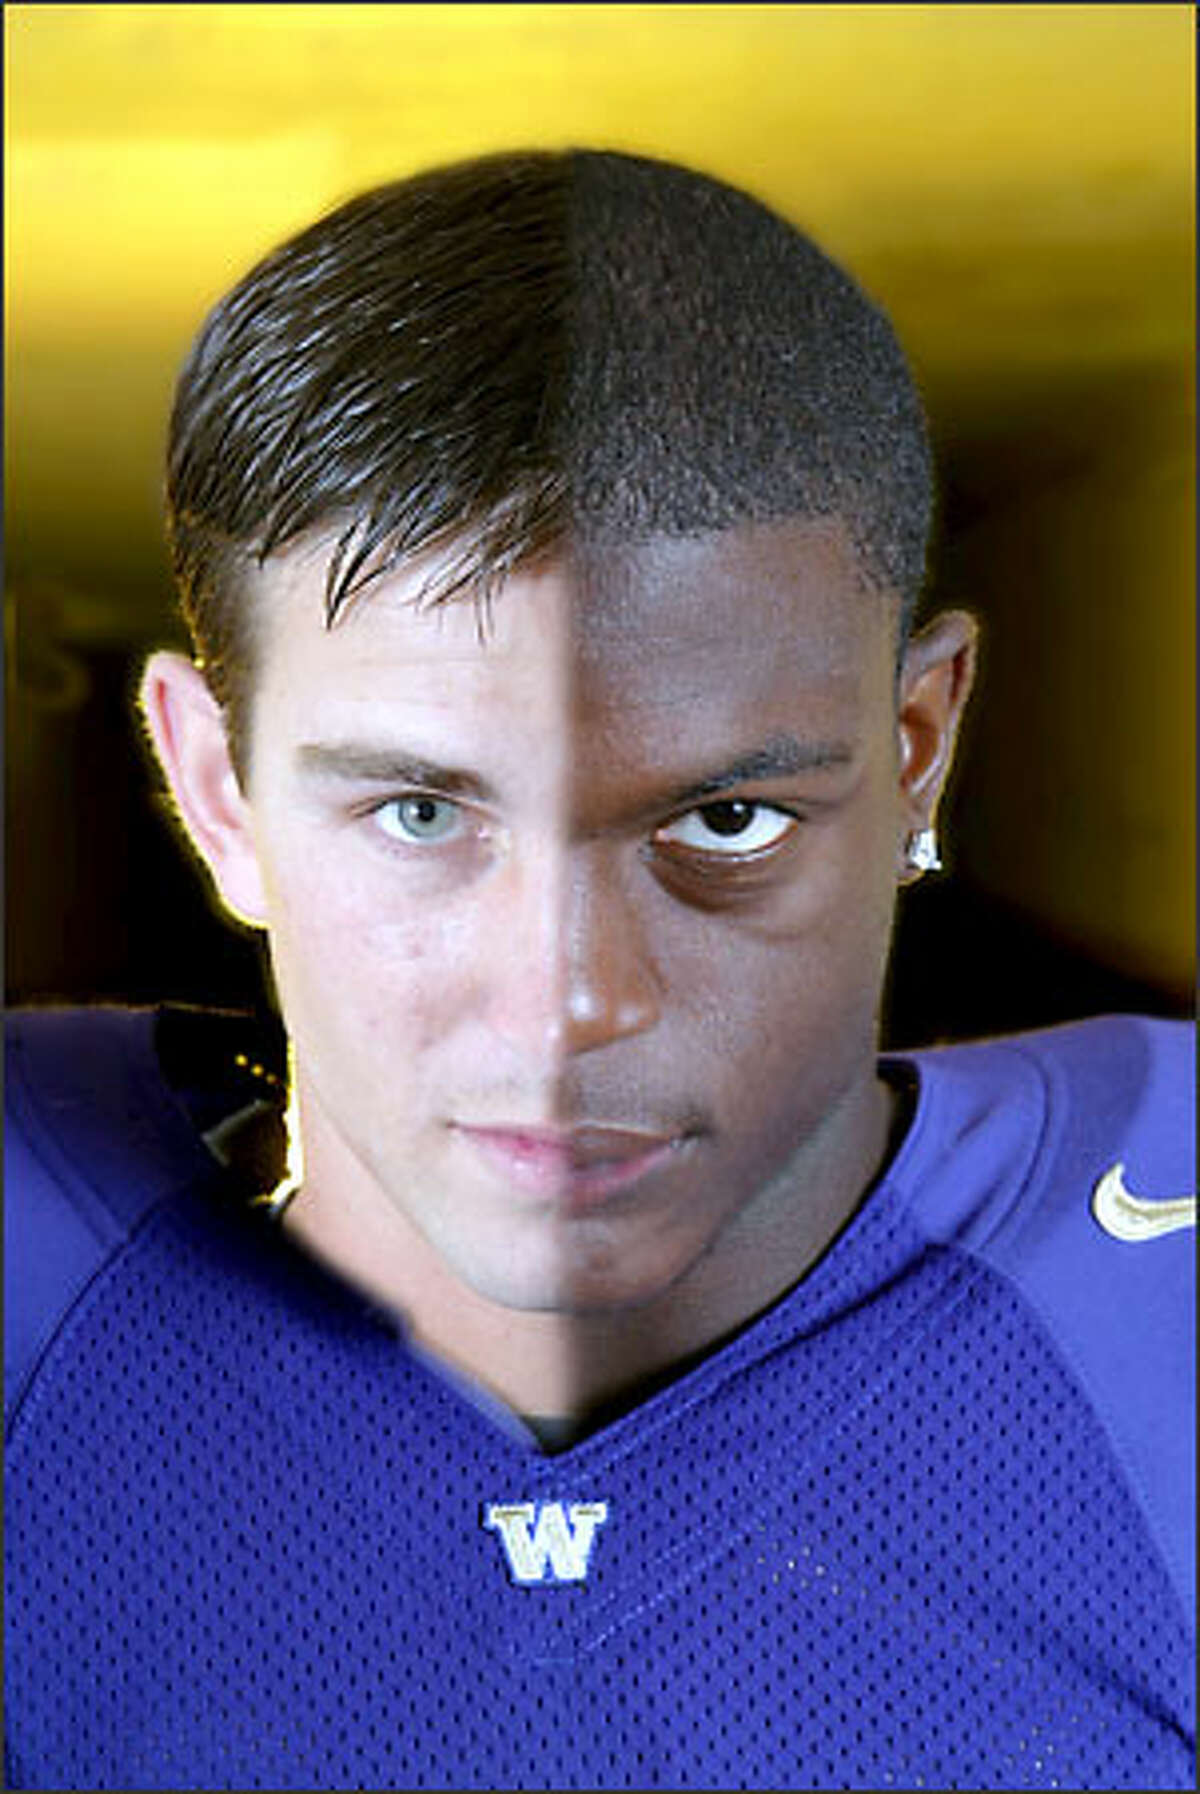 Eklund: "This is a photo illustration, merging the faces of Husky quarterback Cody Pickett and wide receiver Reggie Williams. Prior to the start of the football season, both were legitimate Heisman Trophy candidates. There was very little manipulation done in Photoshop other than bringing their faces together. It was amazing how well their features matched up."